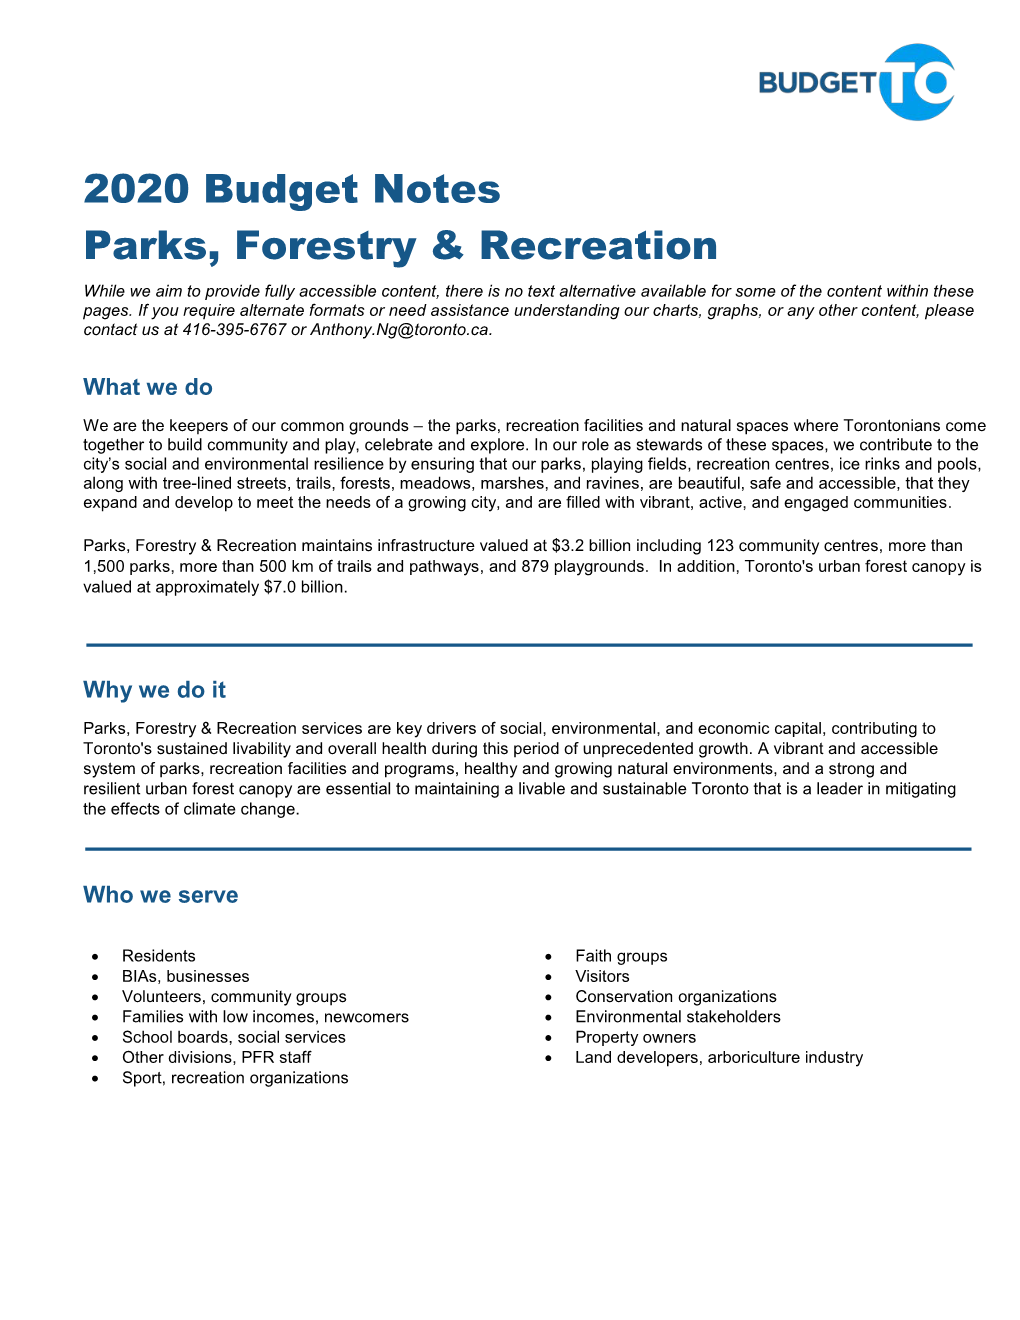 2020 Budget Notes Parks, Forestry & Recreation